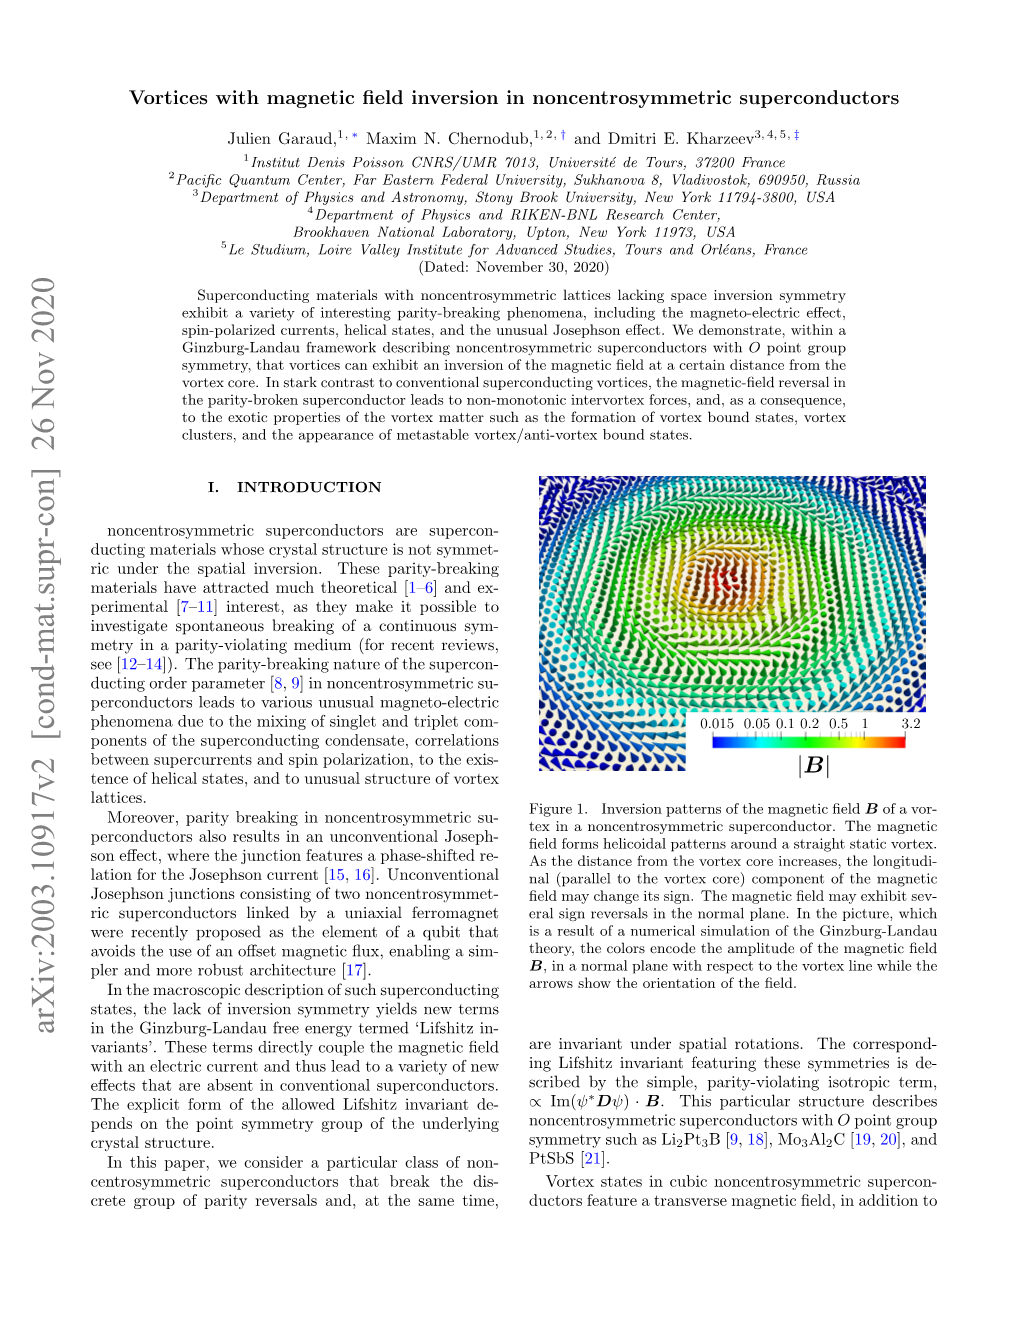 Vortices with Magnetic Field Inversion in Noncentrosymmetric